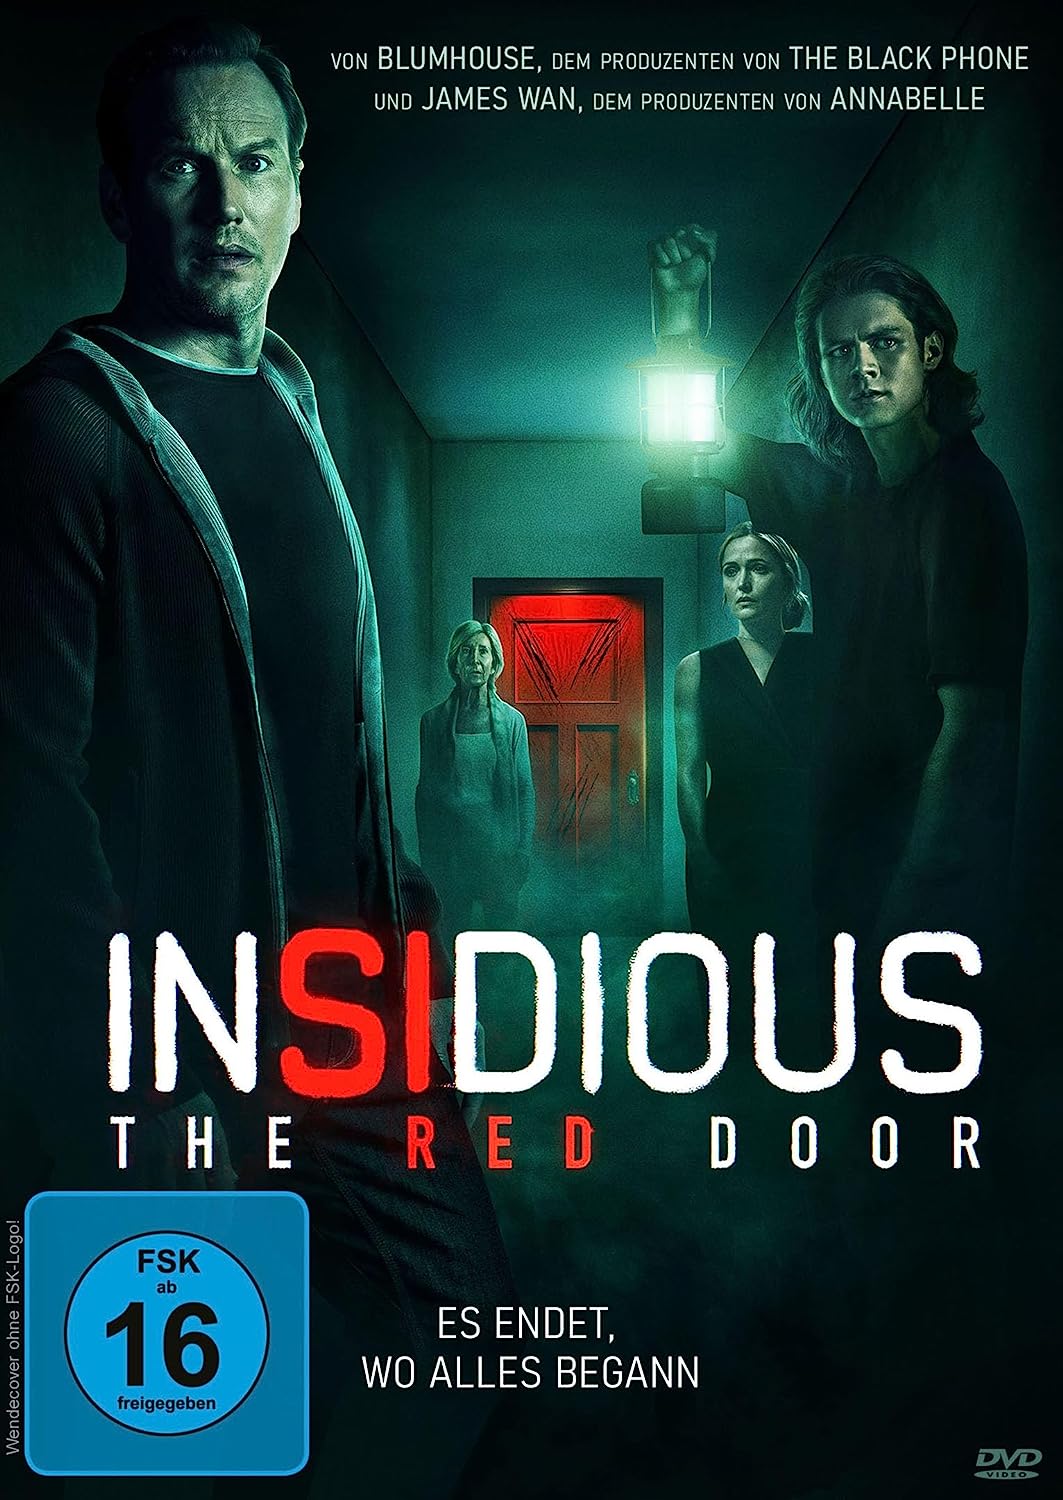 Insidious The Red Door - Dvd Cover